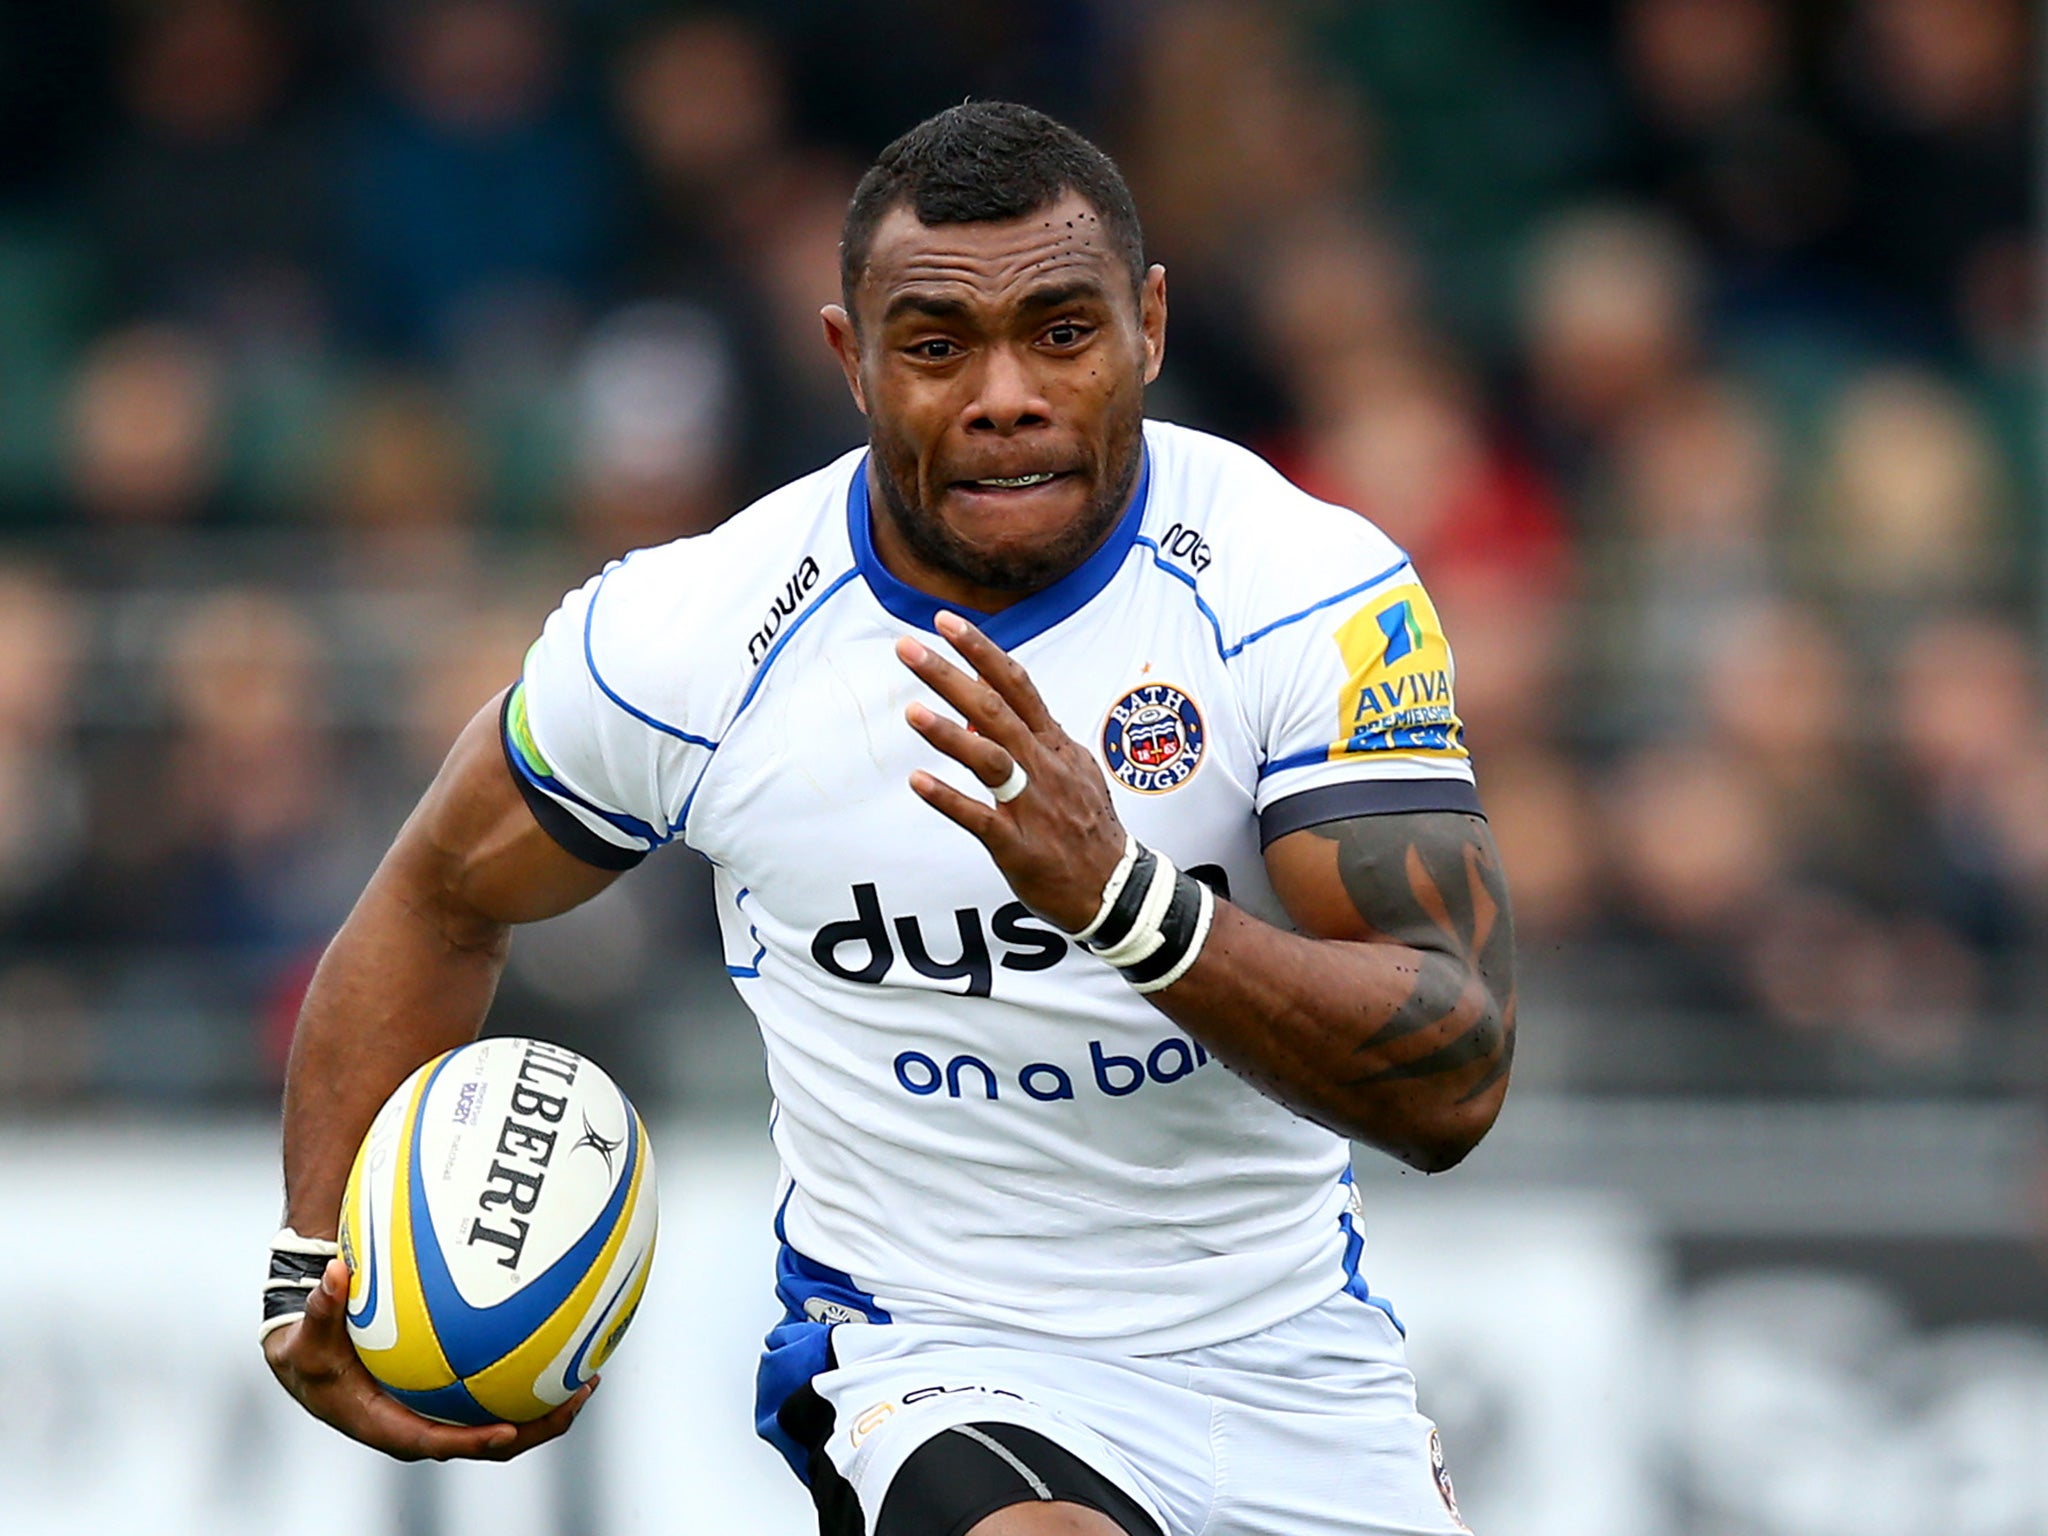 Semesa Rokoduguni has a point to prove for Bath after falling out of favour for England